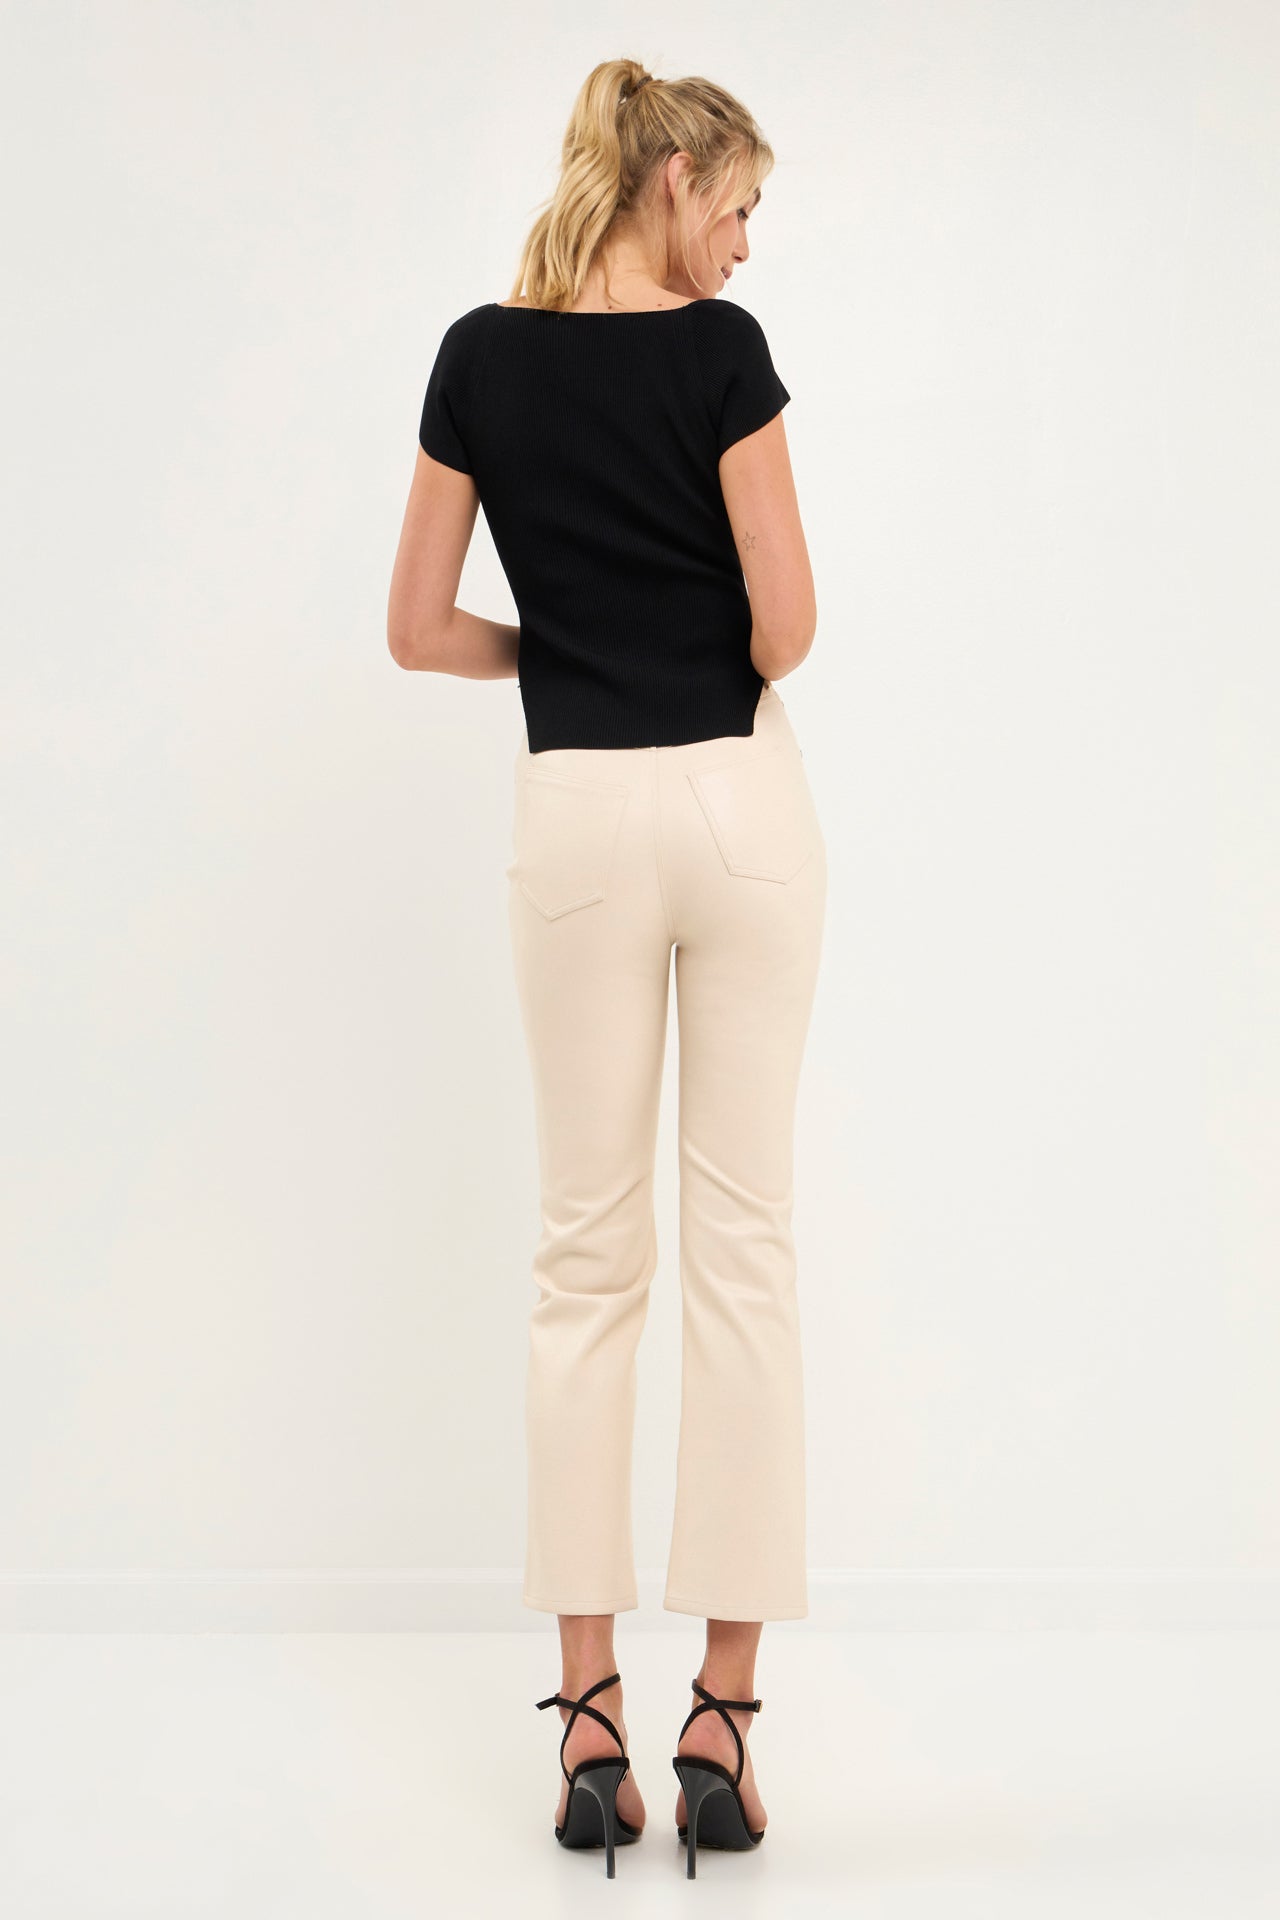 GREY LAB-High-Waisted Faux Leather Pants-PANTS available at Objectrare